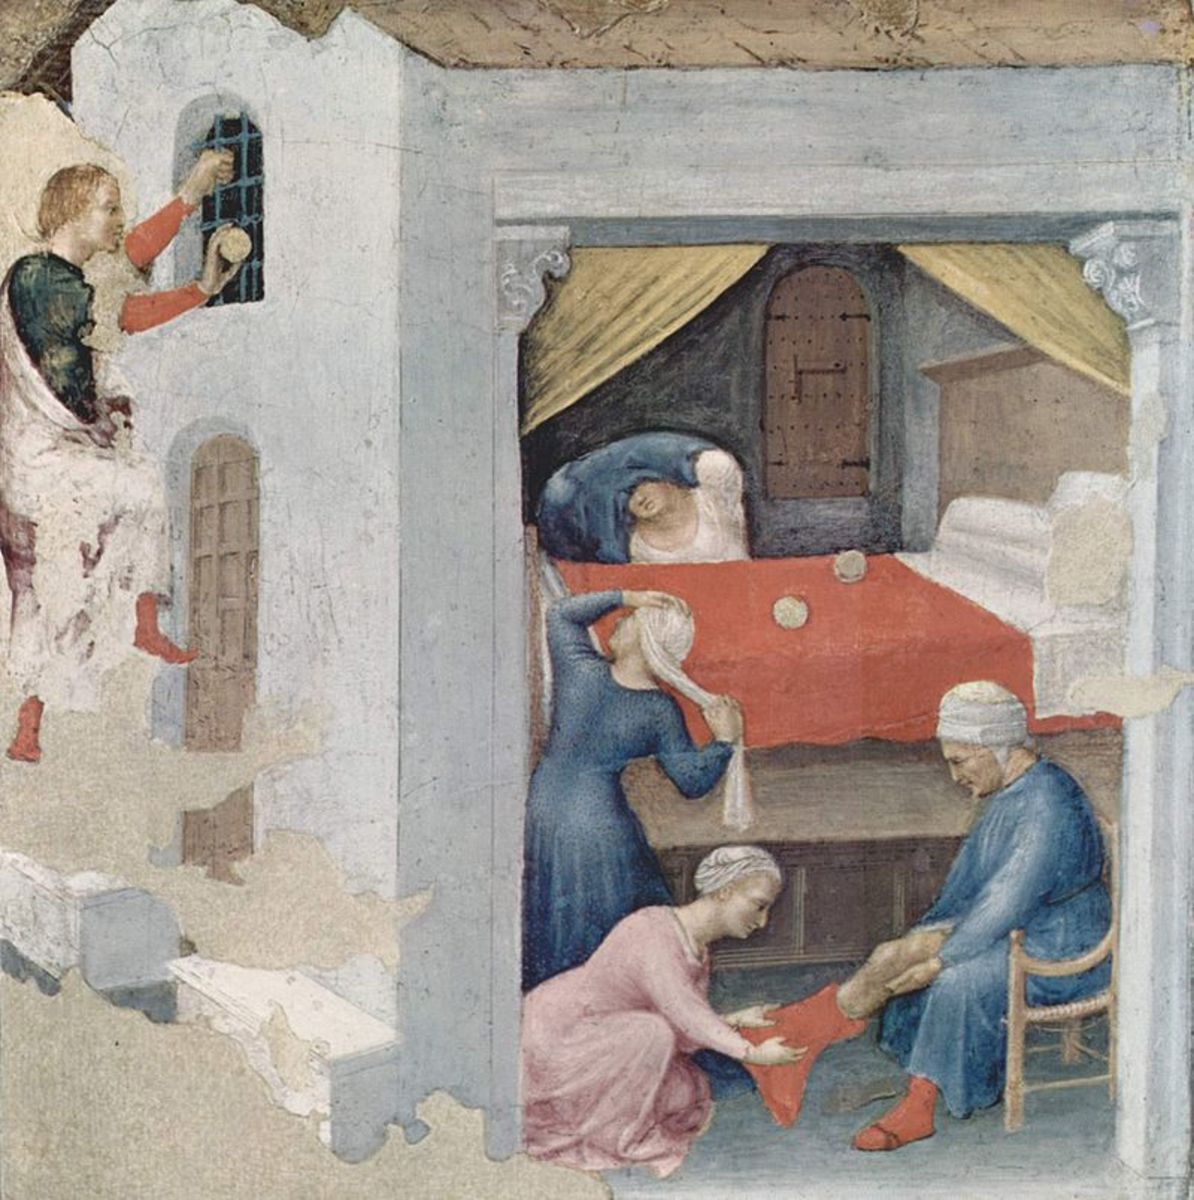 A painting depicting the story of St. Nicholas and the three young women.